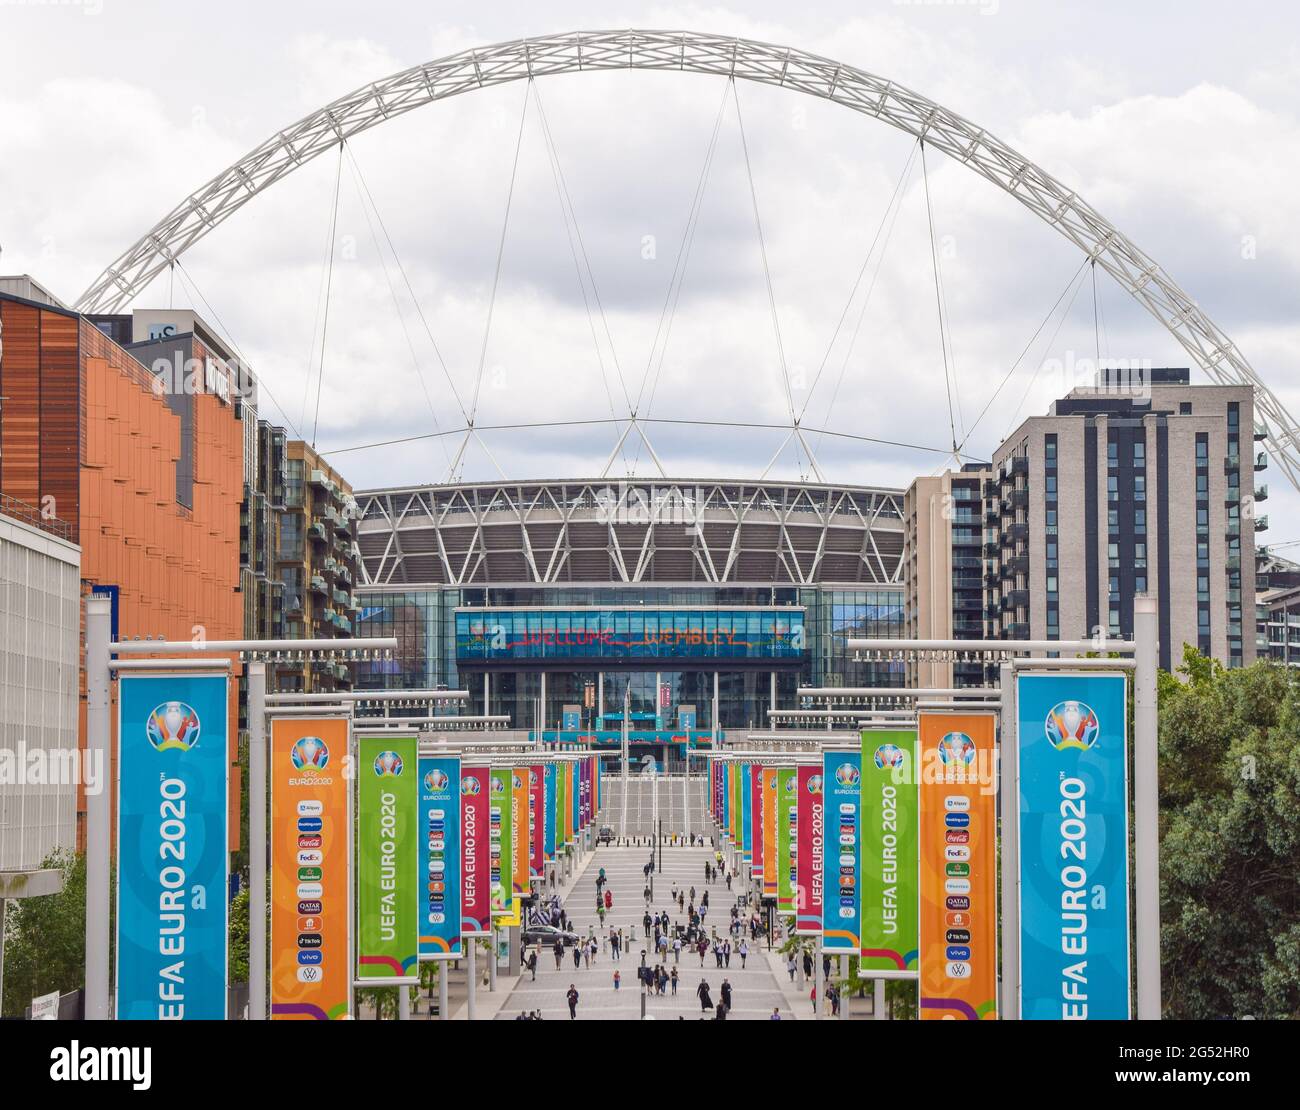 UEFA Euro 2020 banners and signs outside Wembley Stadium. London